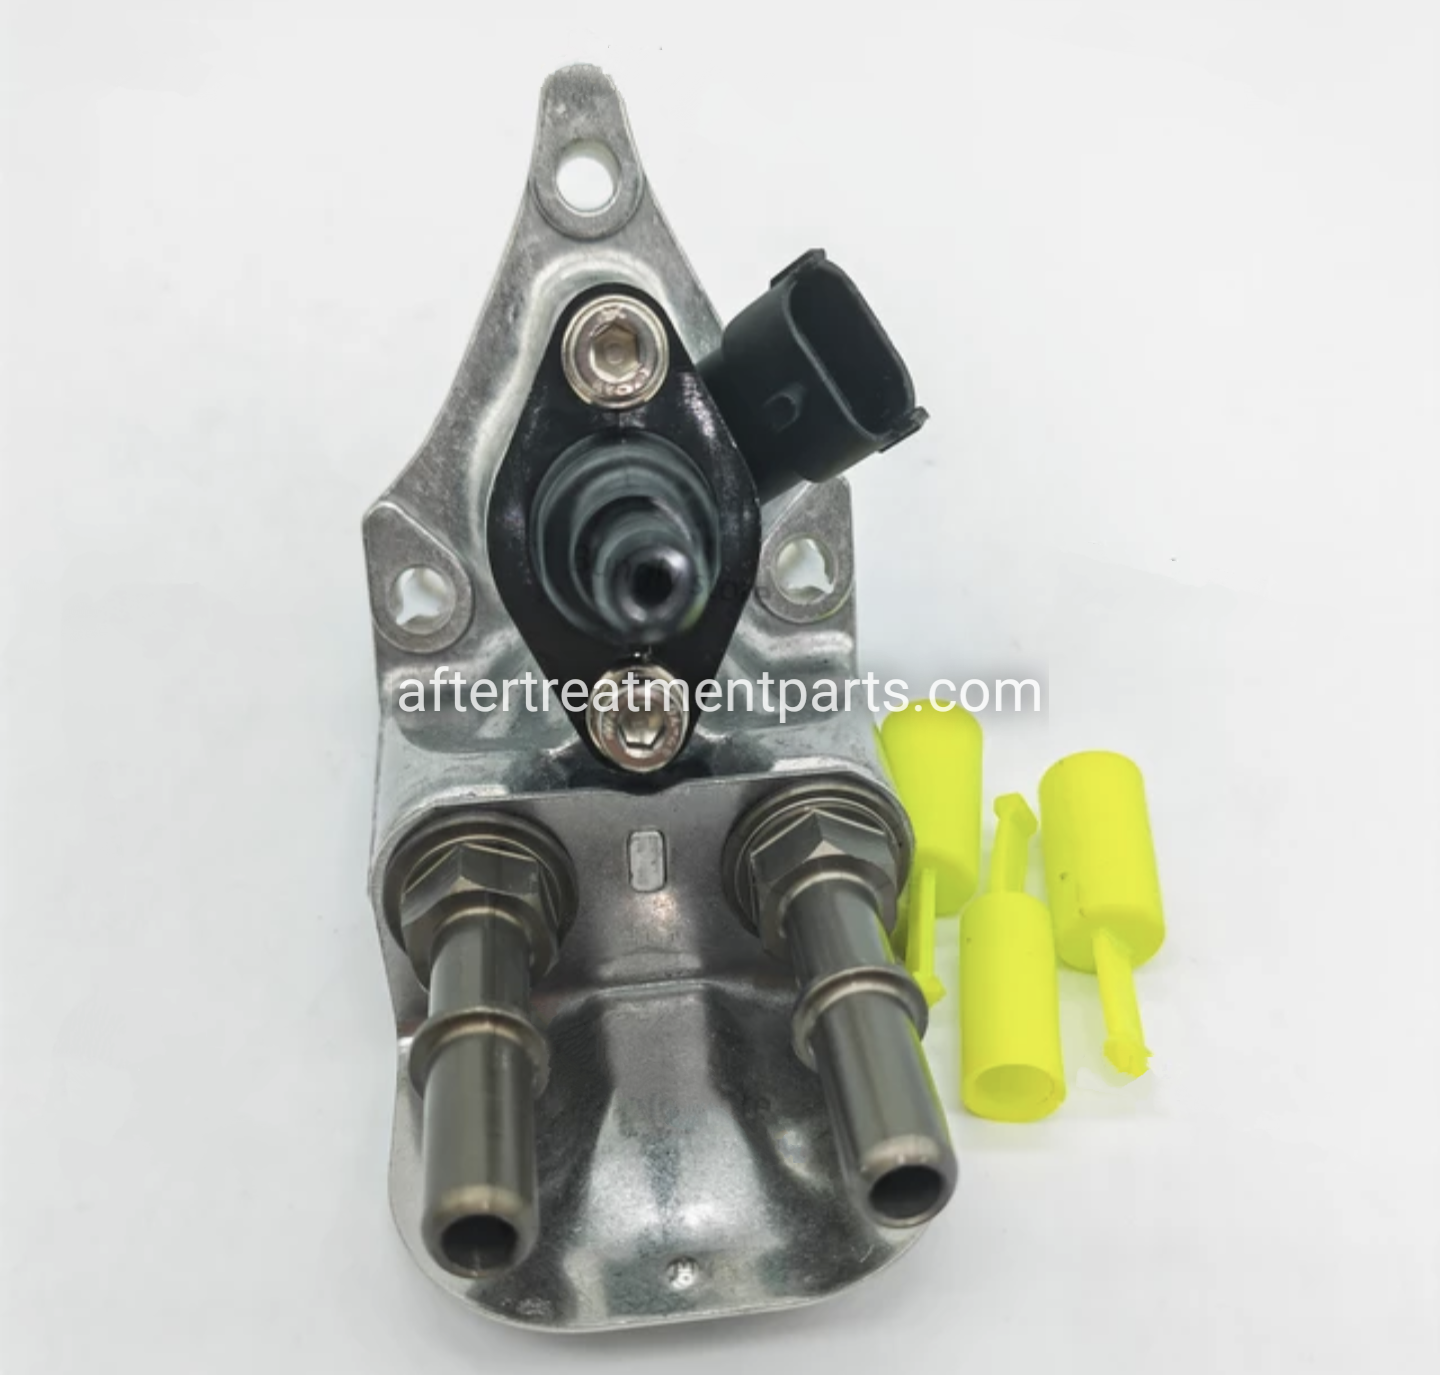 485-9752 | DEF Injector | For Caterpillar® Engines